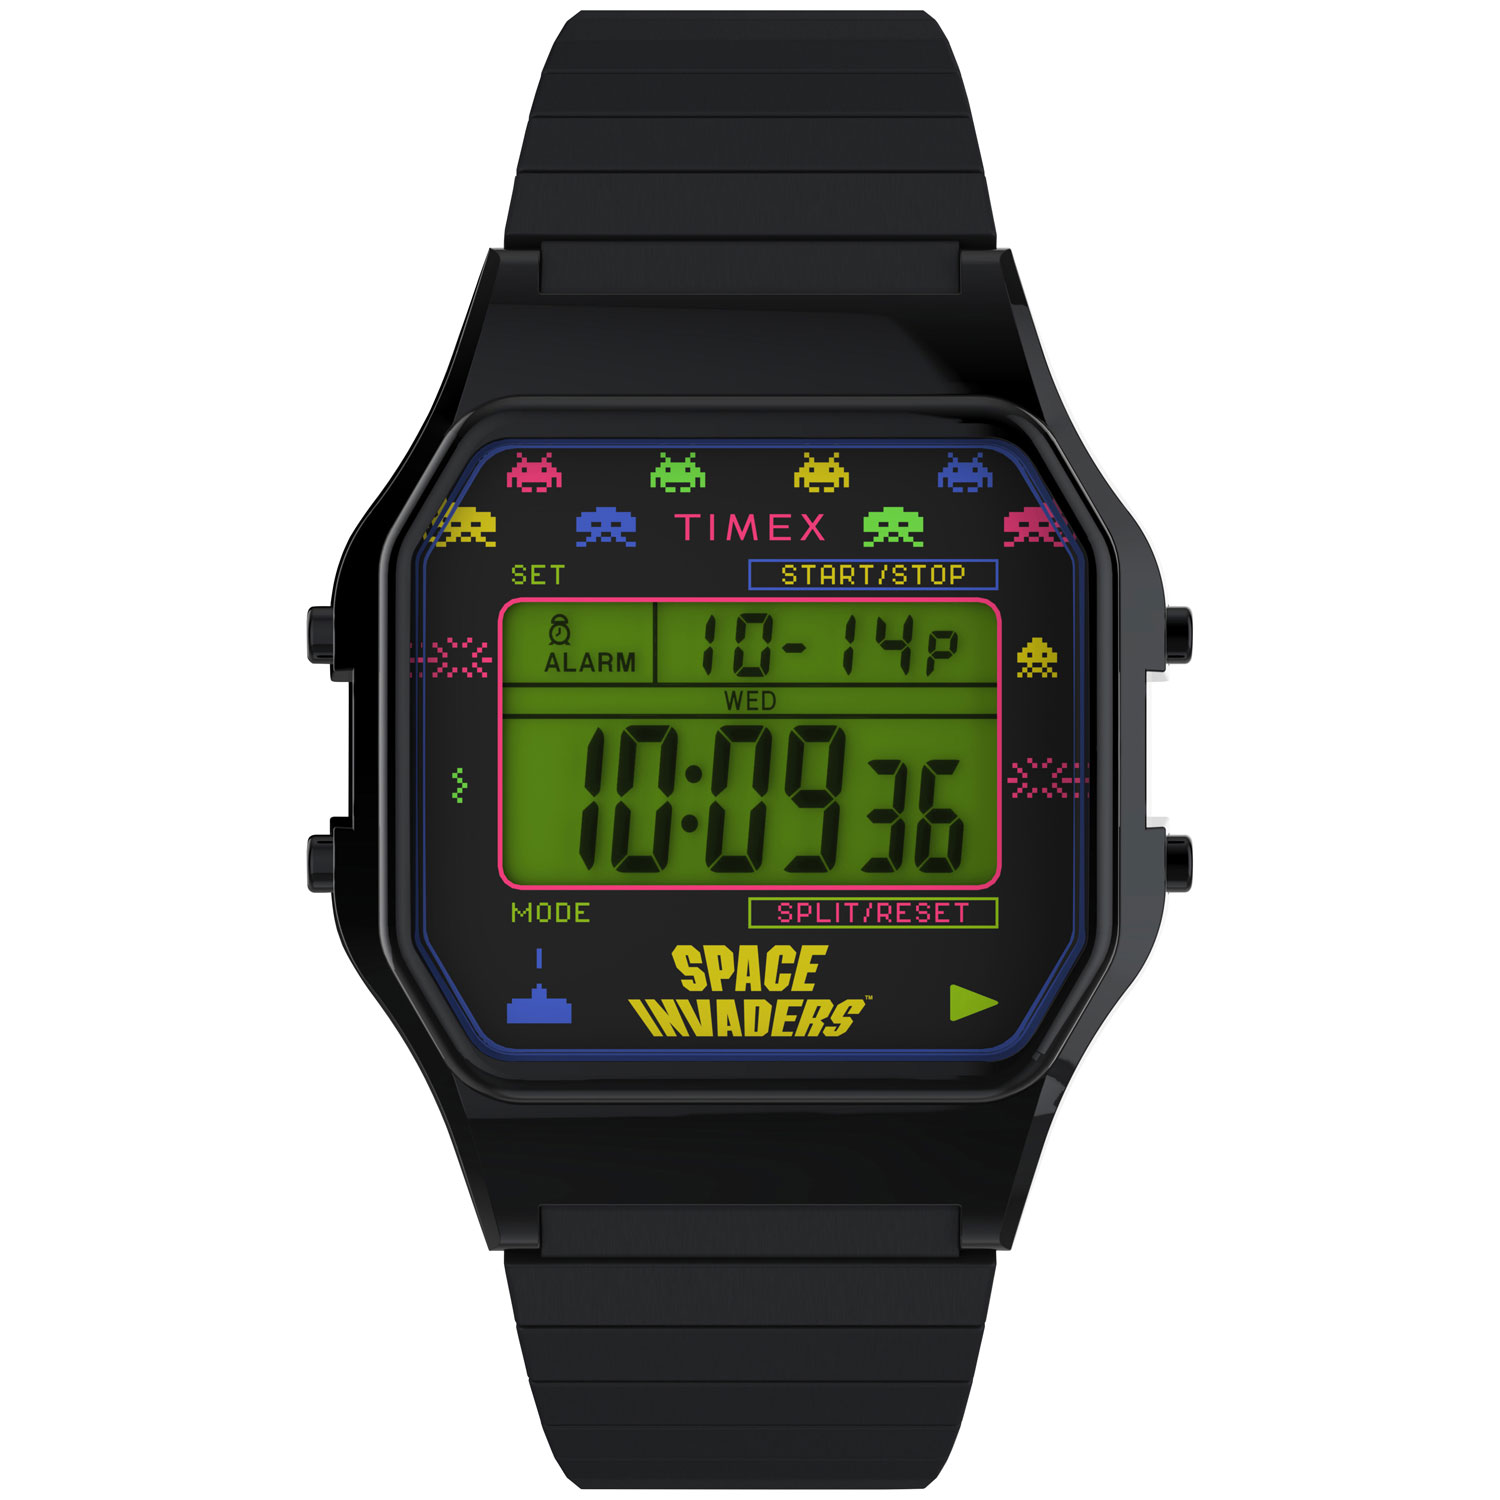 Timex T80 x Space Invaders 34mm Digital Chronograph Casual Watch - Black